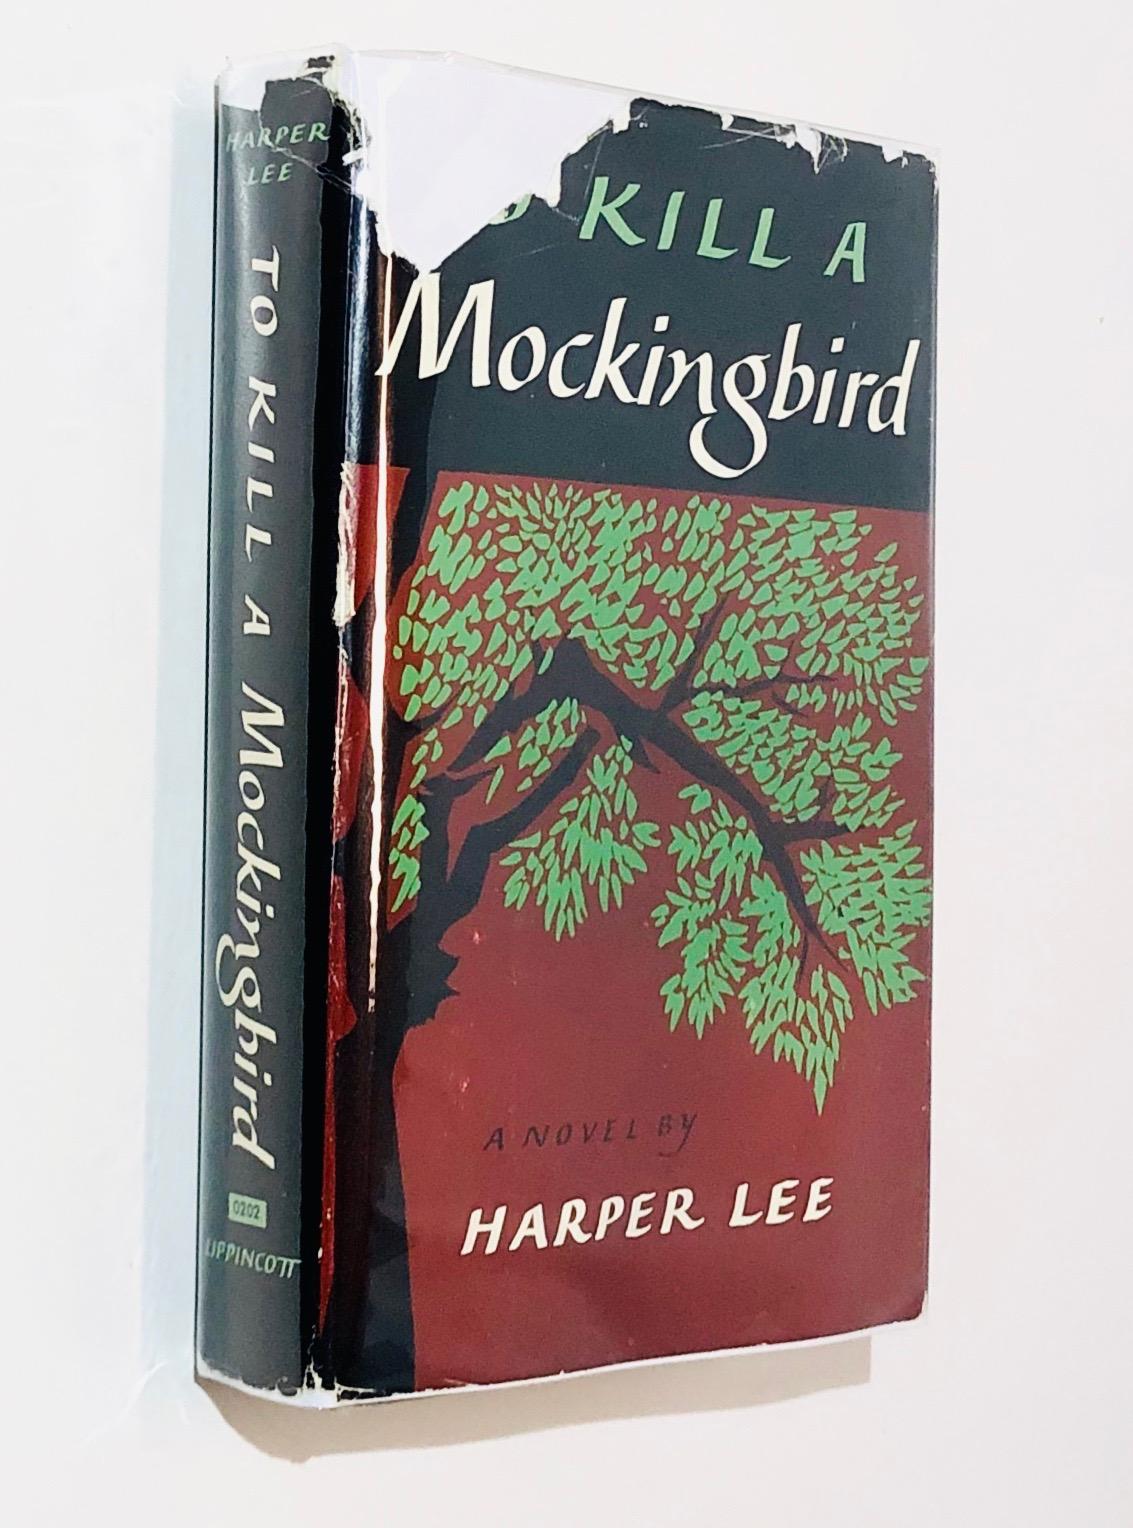 To Kill a Mockingbird by Harper Lee (1960) First Edition Later Printing